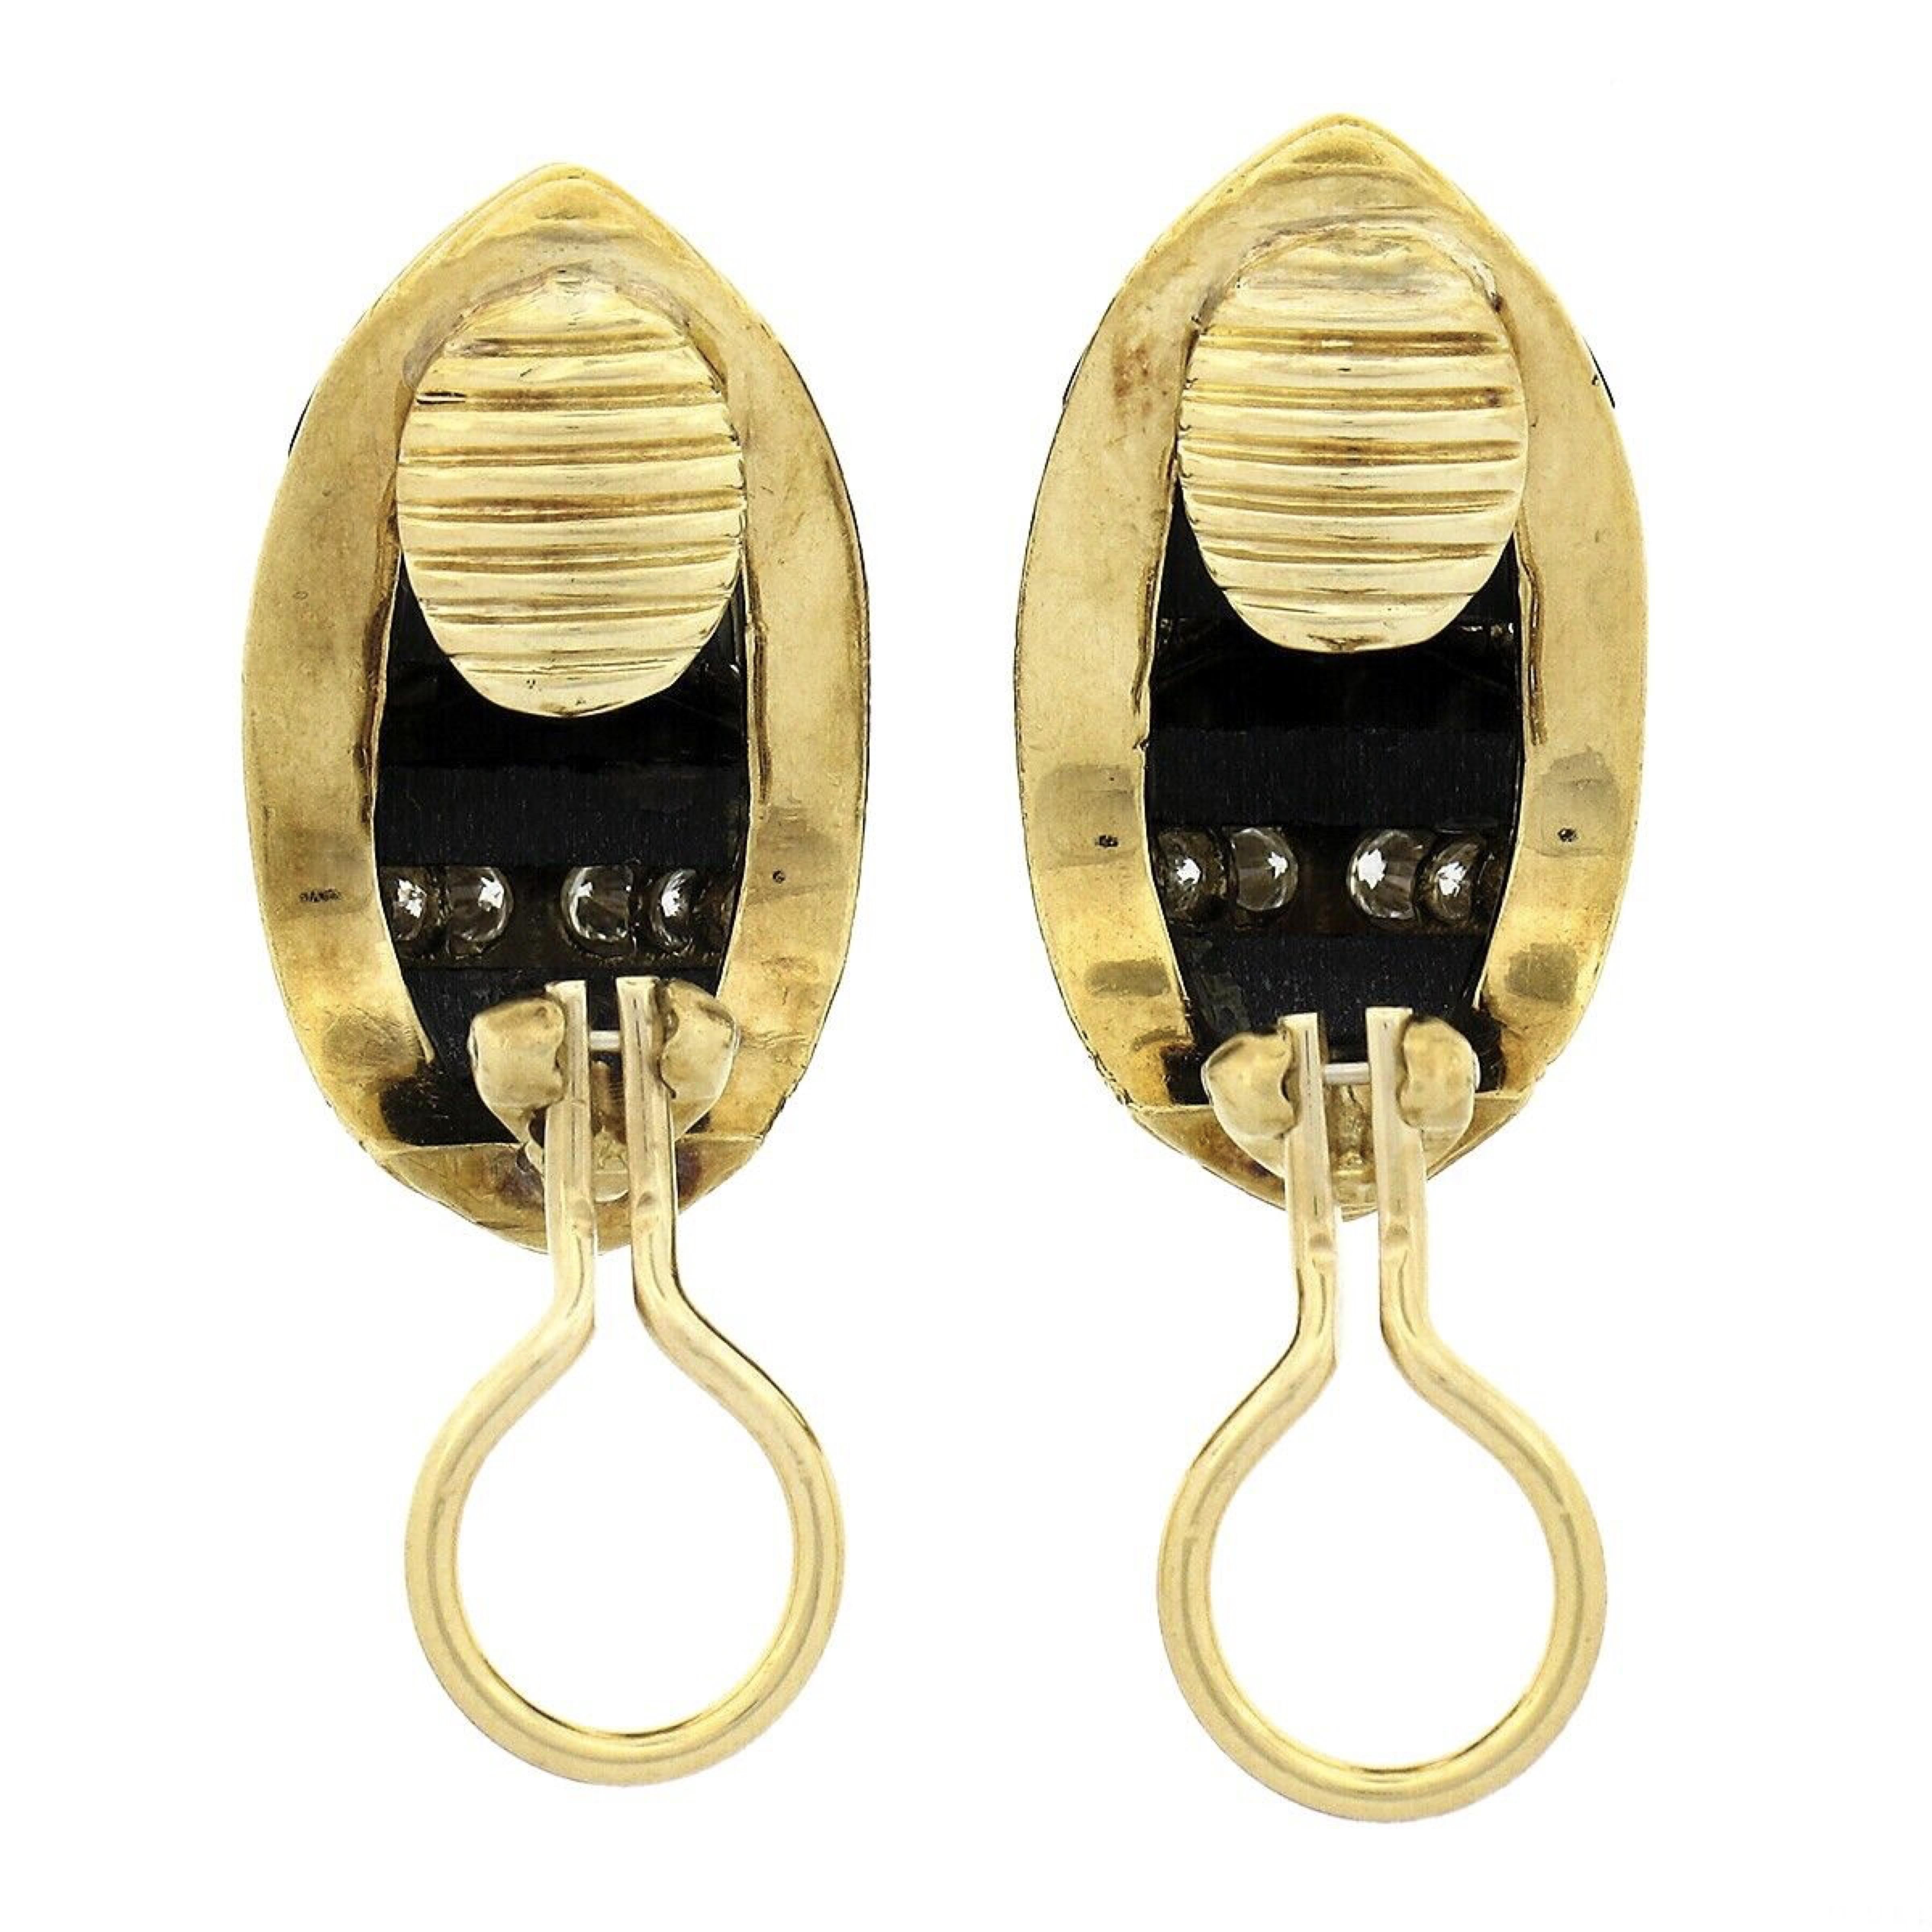 Vintage 18k Gold Inlaid Black Onyx & Pave Diamond Striped Domed Button Earrings For Sale 1